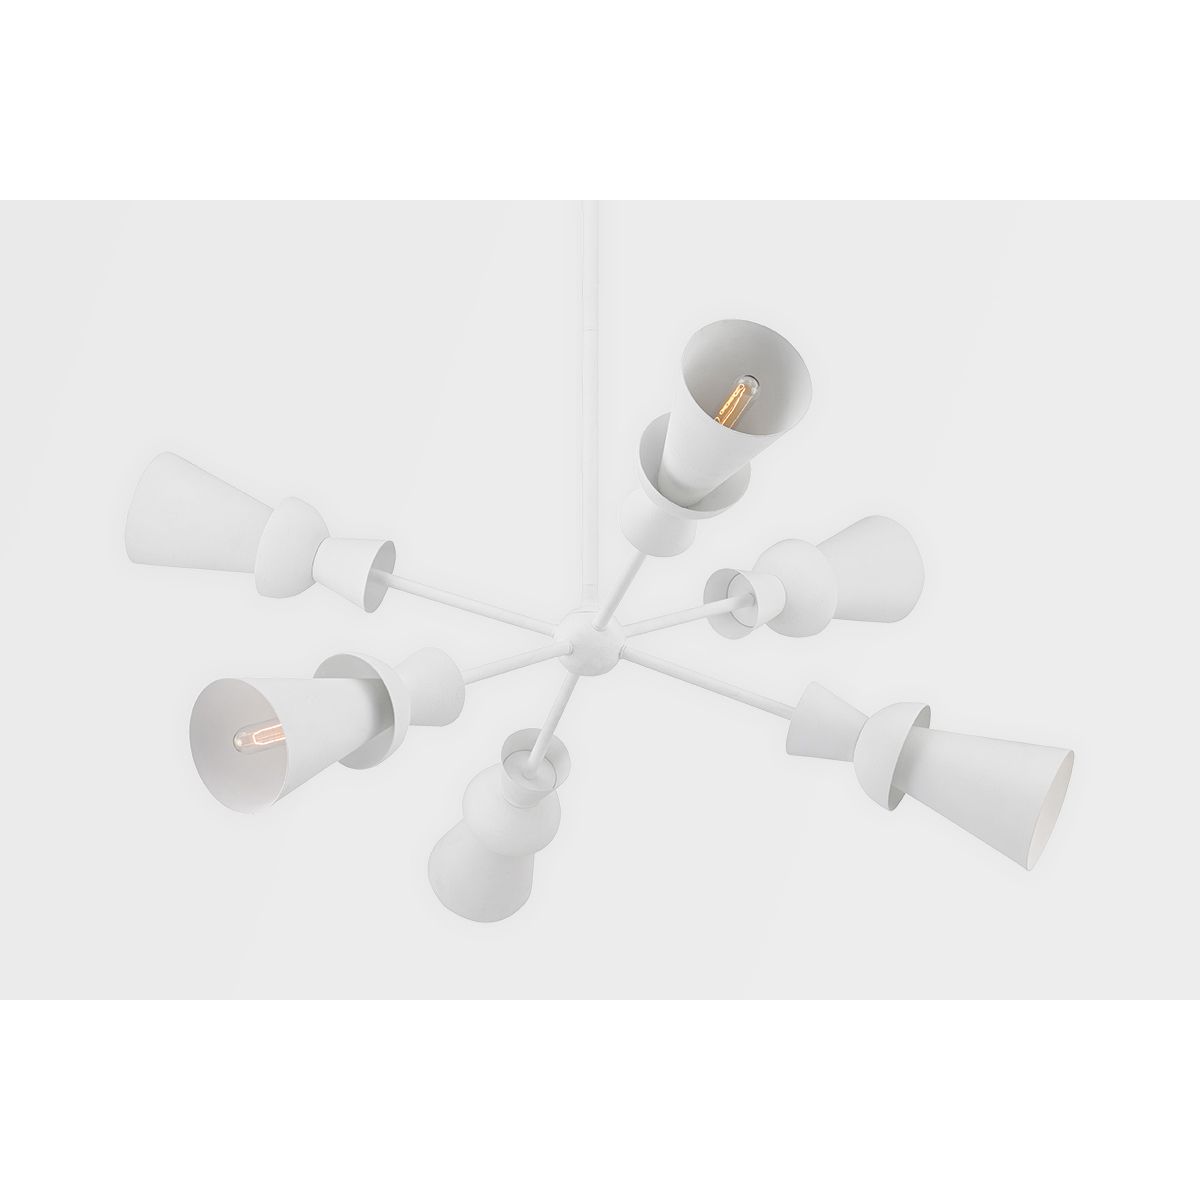 FLORENCE 6 lights Chandelier White finish